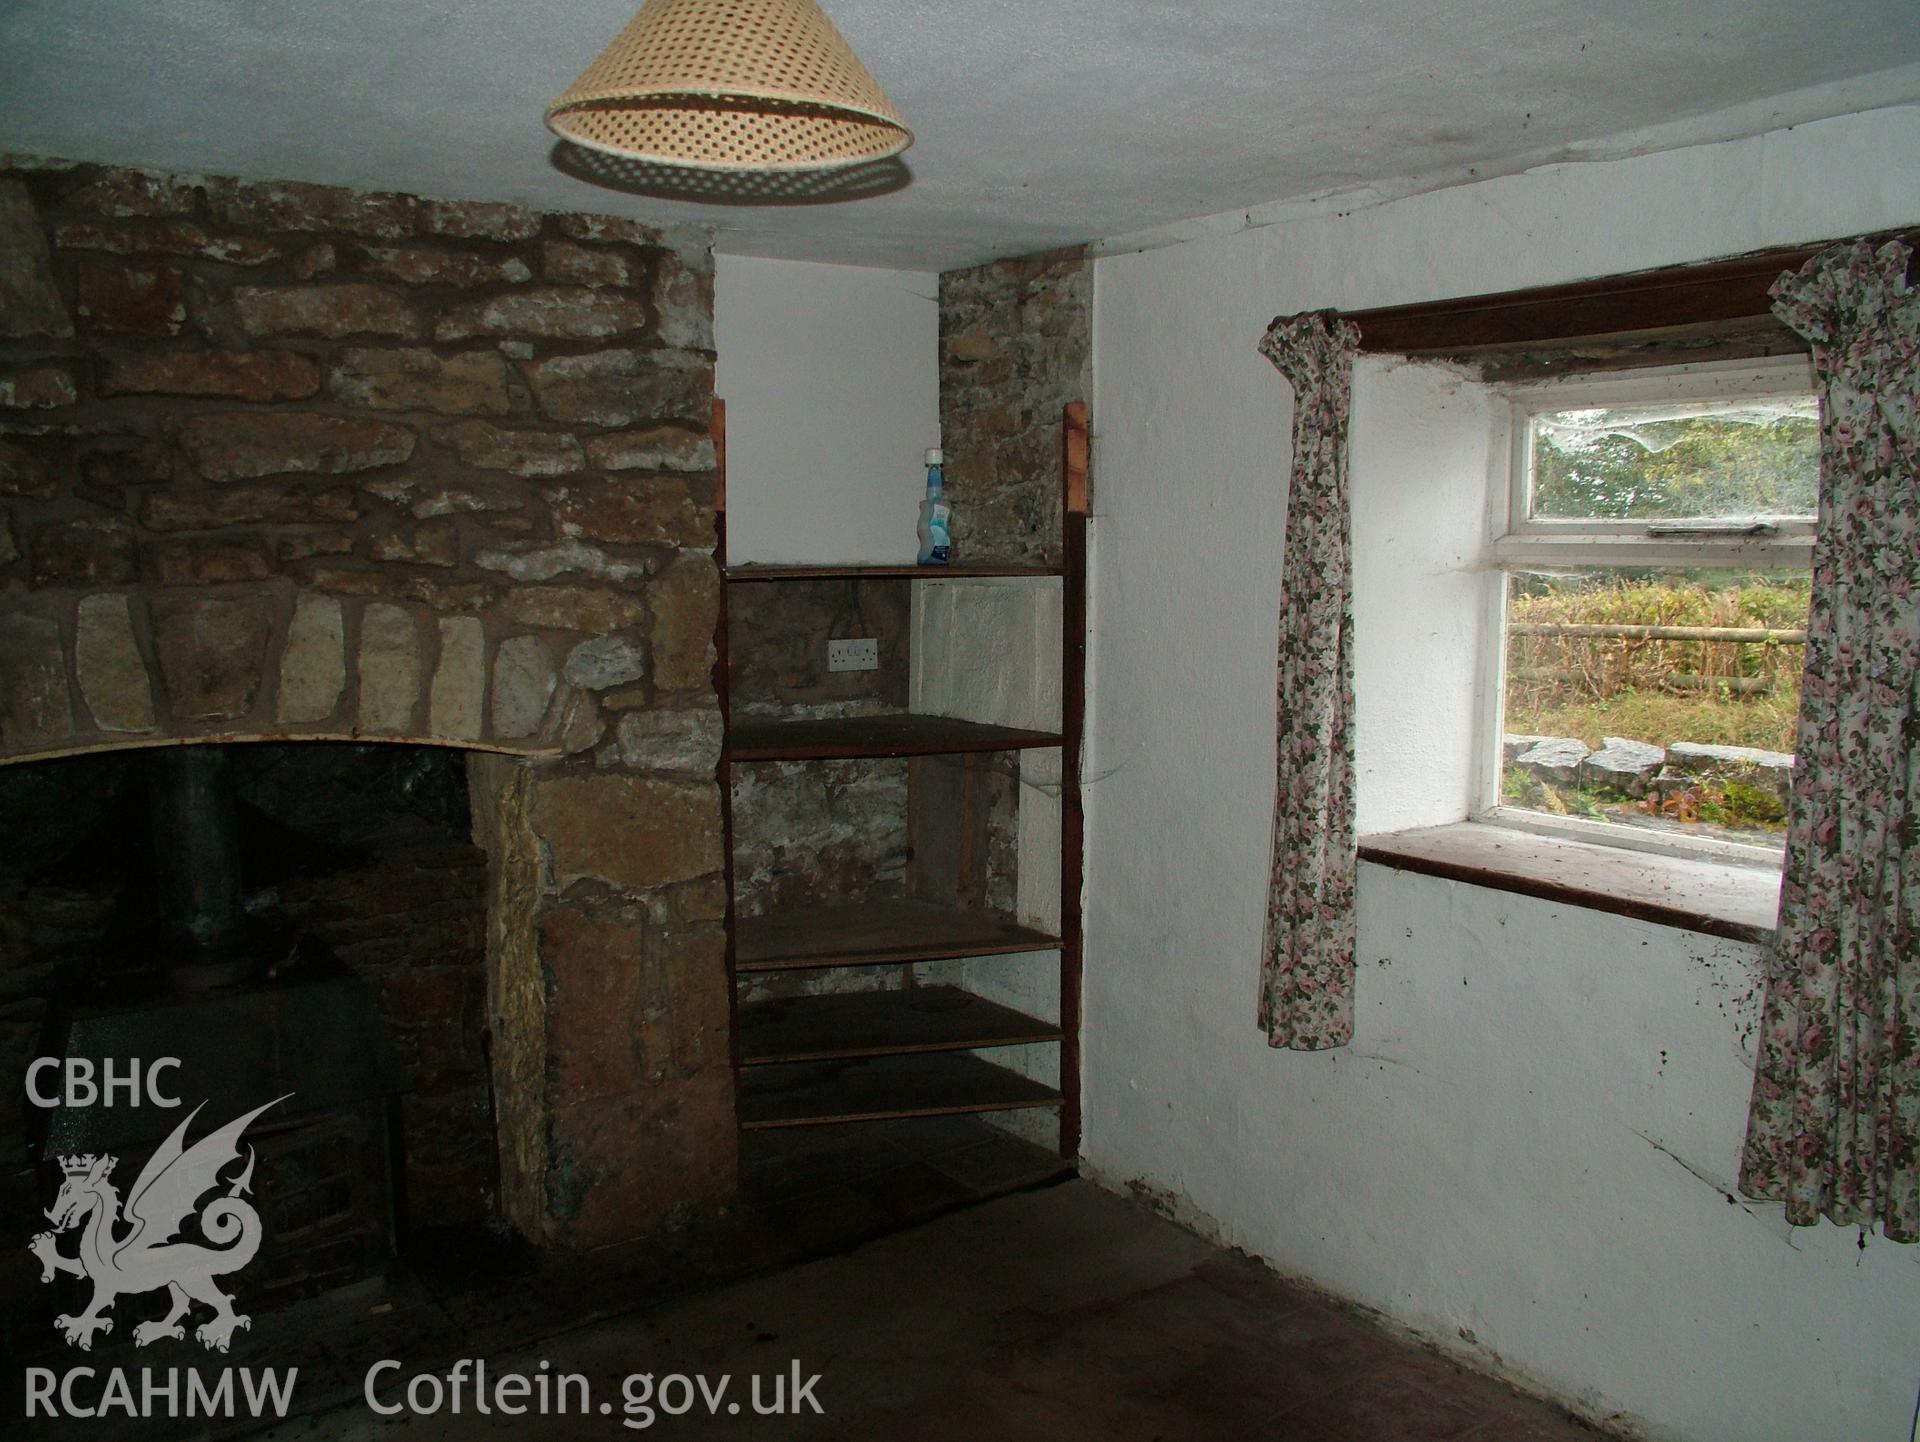 Digital colour photograph showing Llwynypandy chapel house - interior, view of window and fireplace